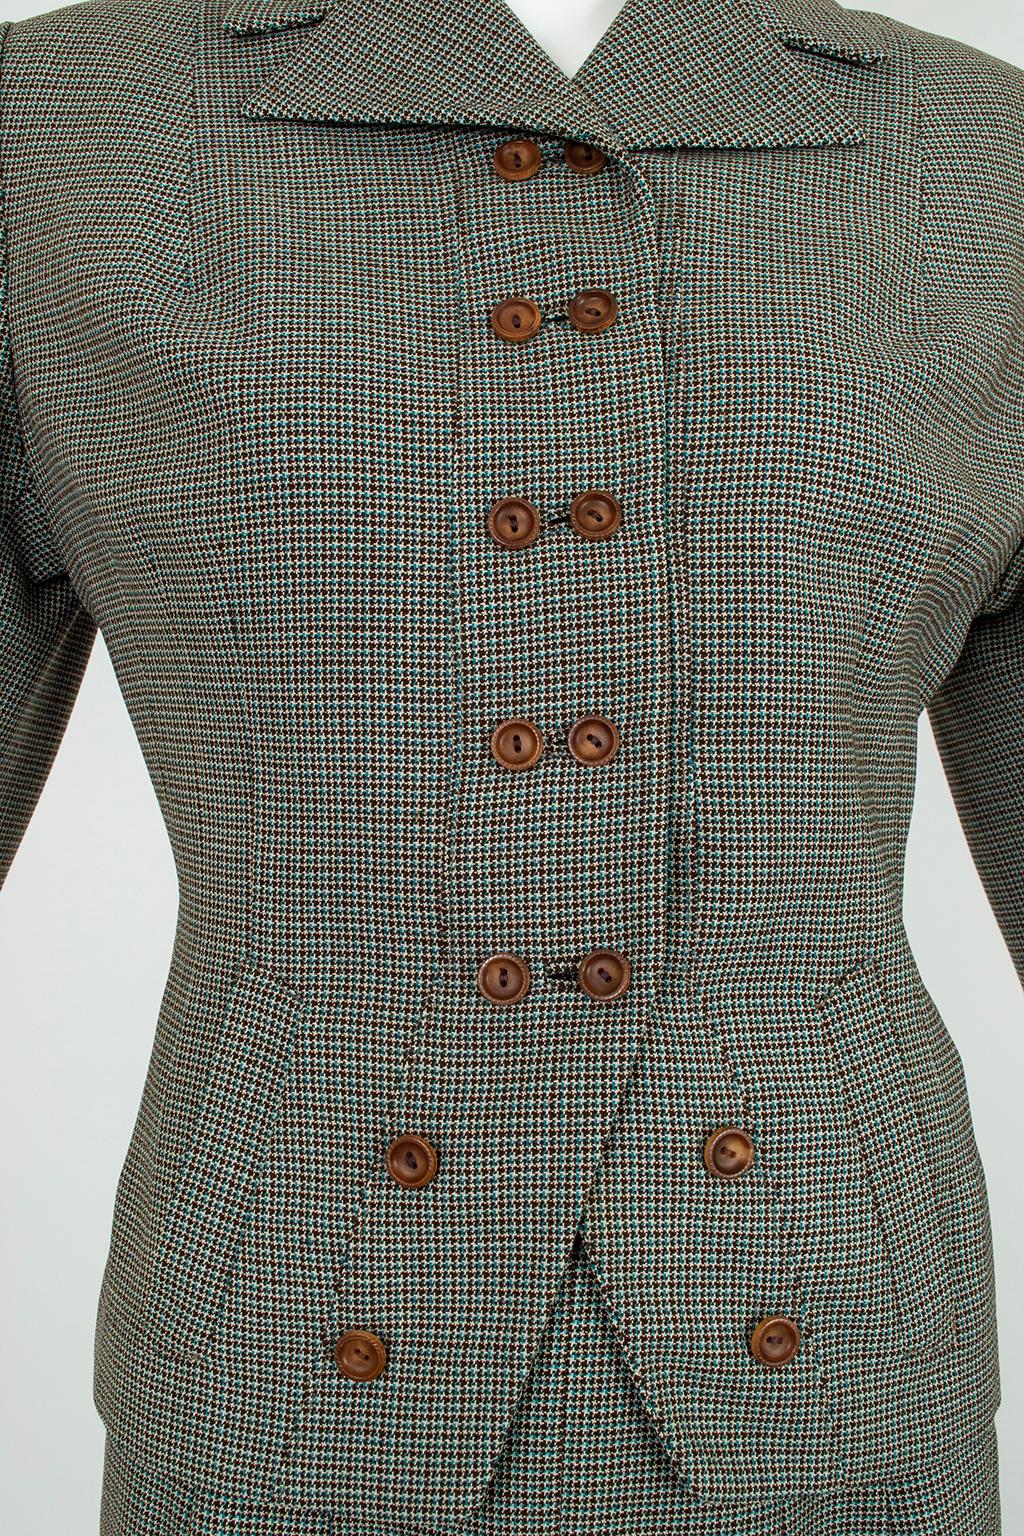 Women's French Blue and Brown Houndstooth Cutaway Suit with Novelty Buttons – S-M, 1940s For Sale